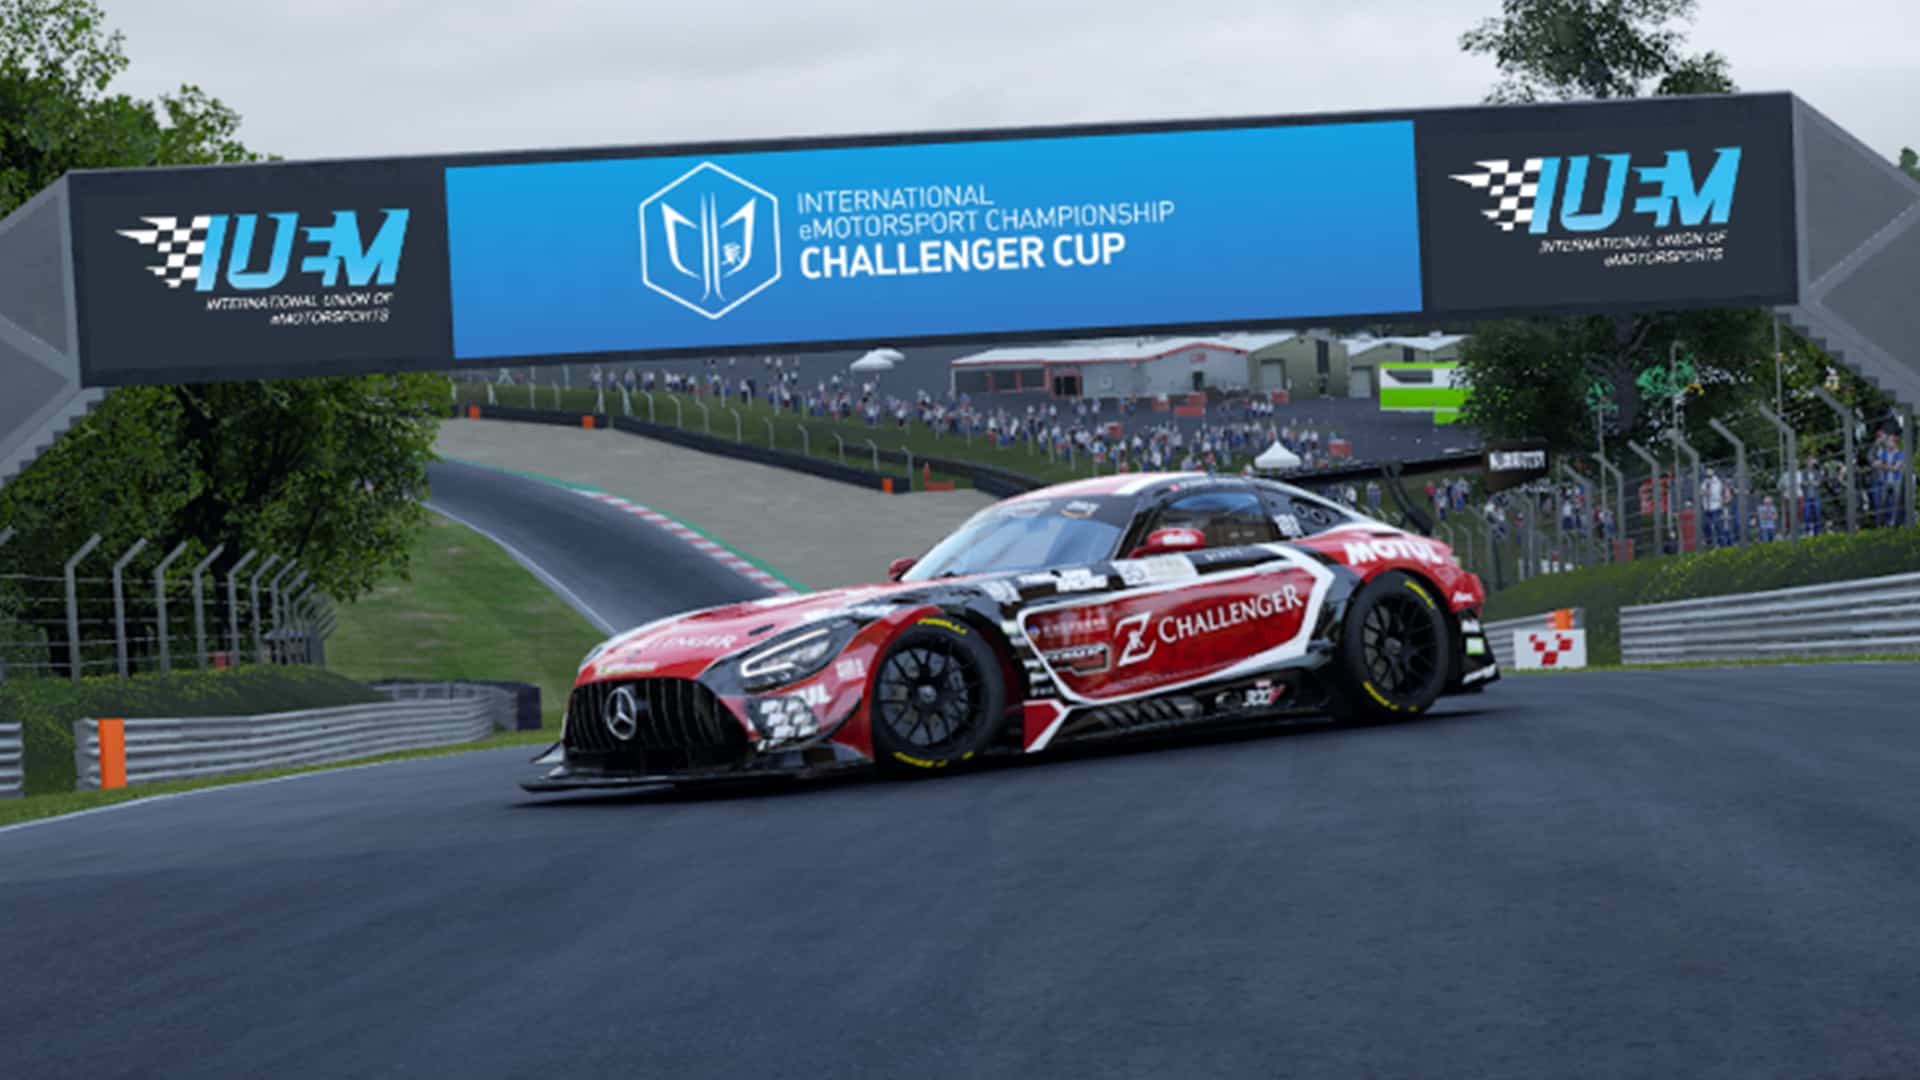 Hong Kong based sim racing competition promises up to €150,000 in prizes